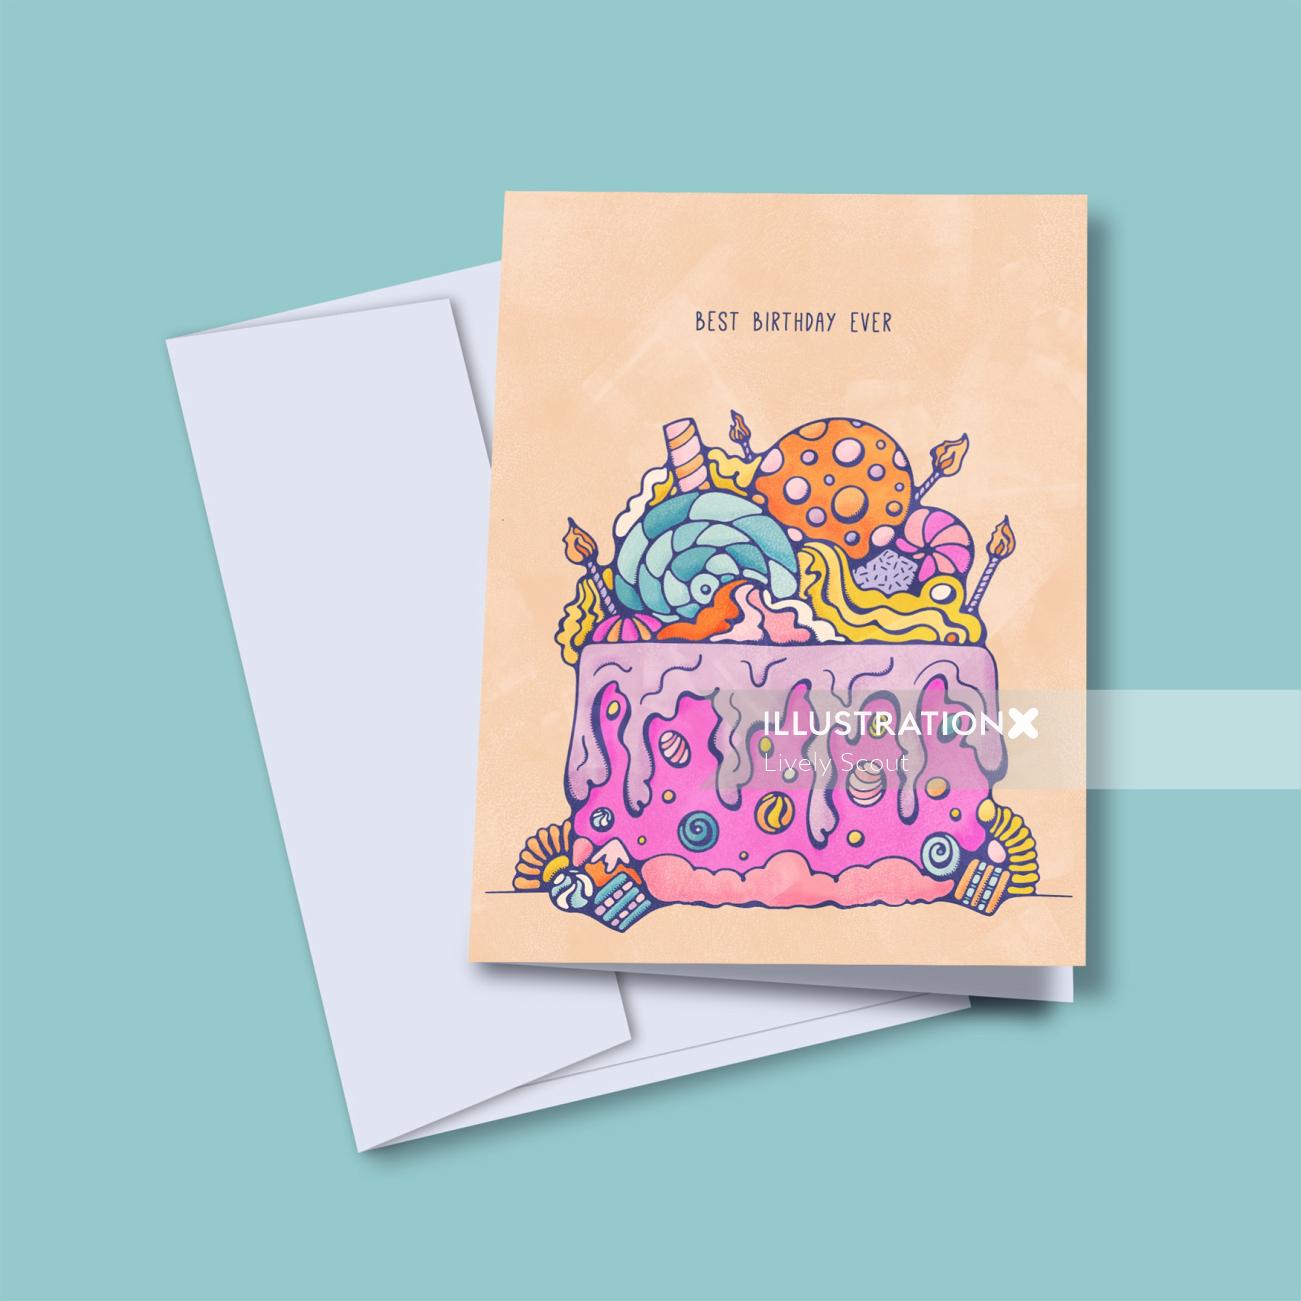 Colourful birthday cake covered in sweet treats on greeting card